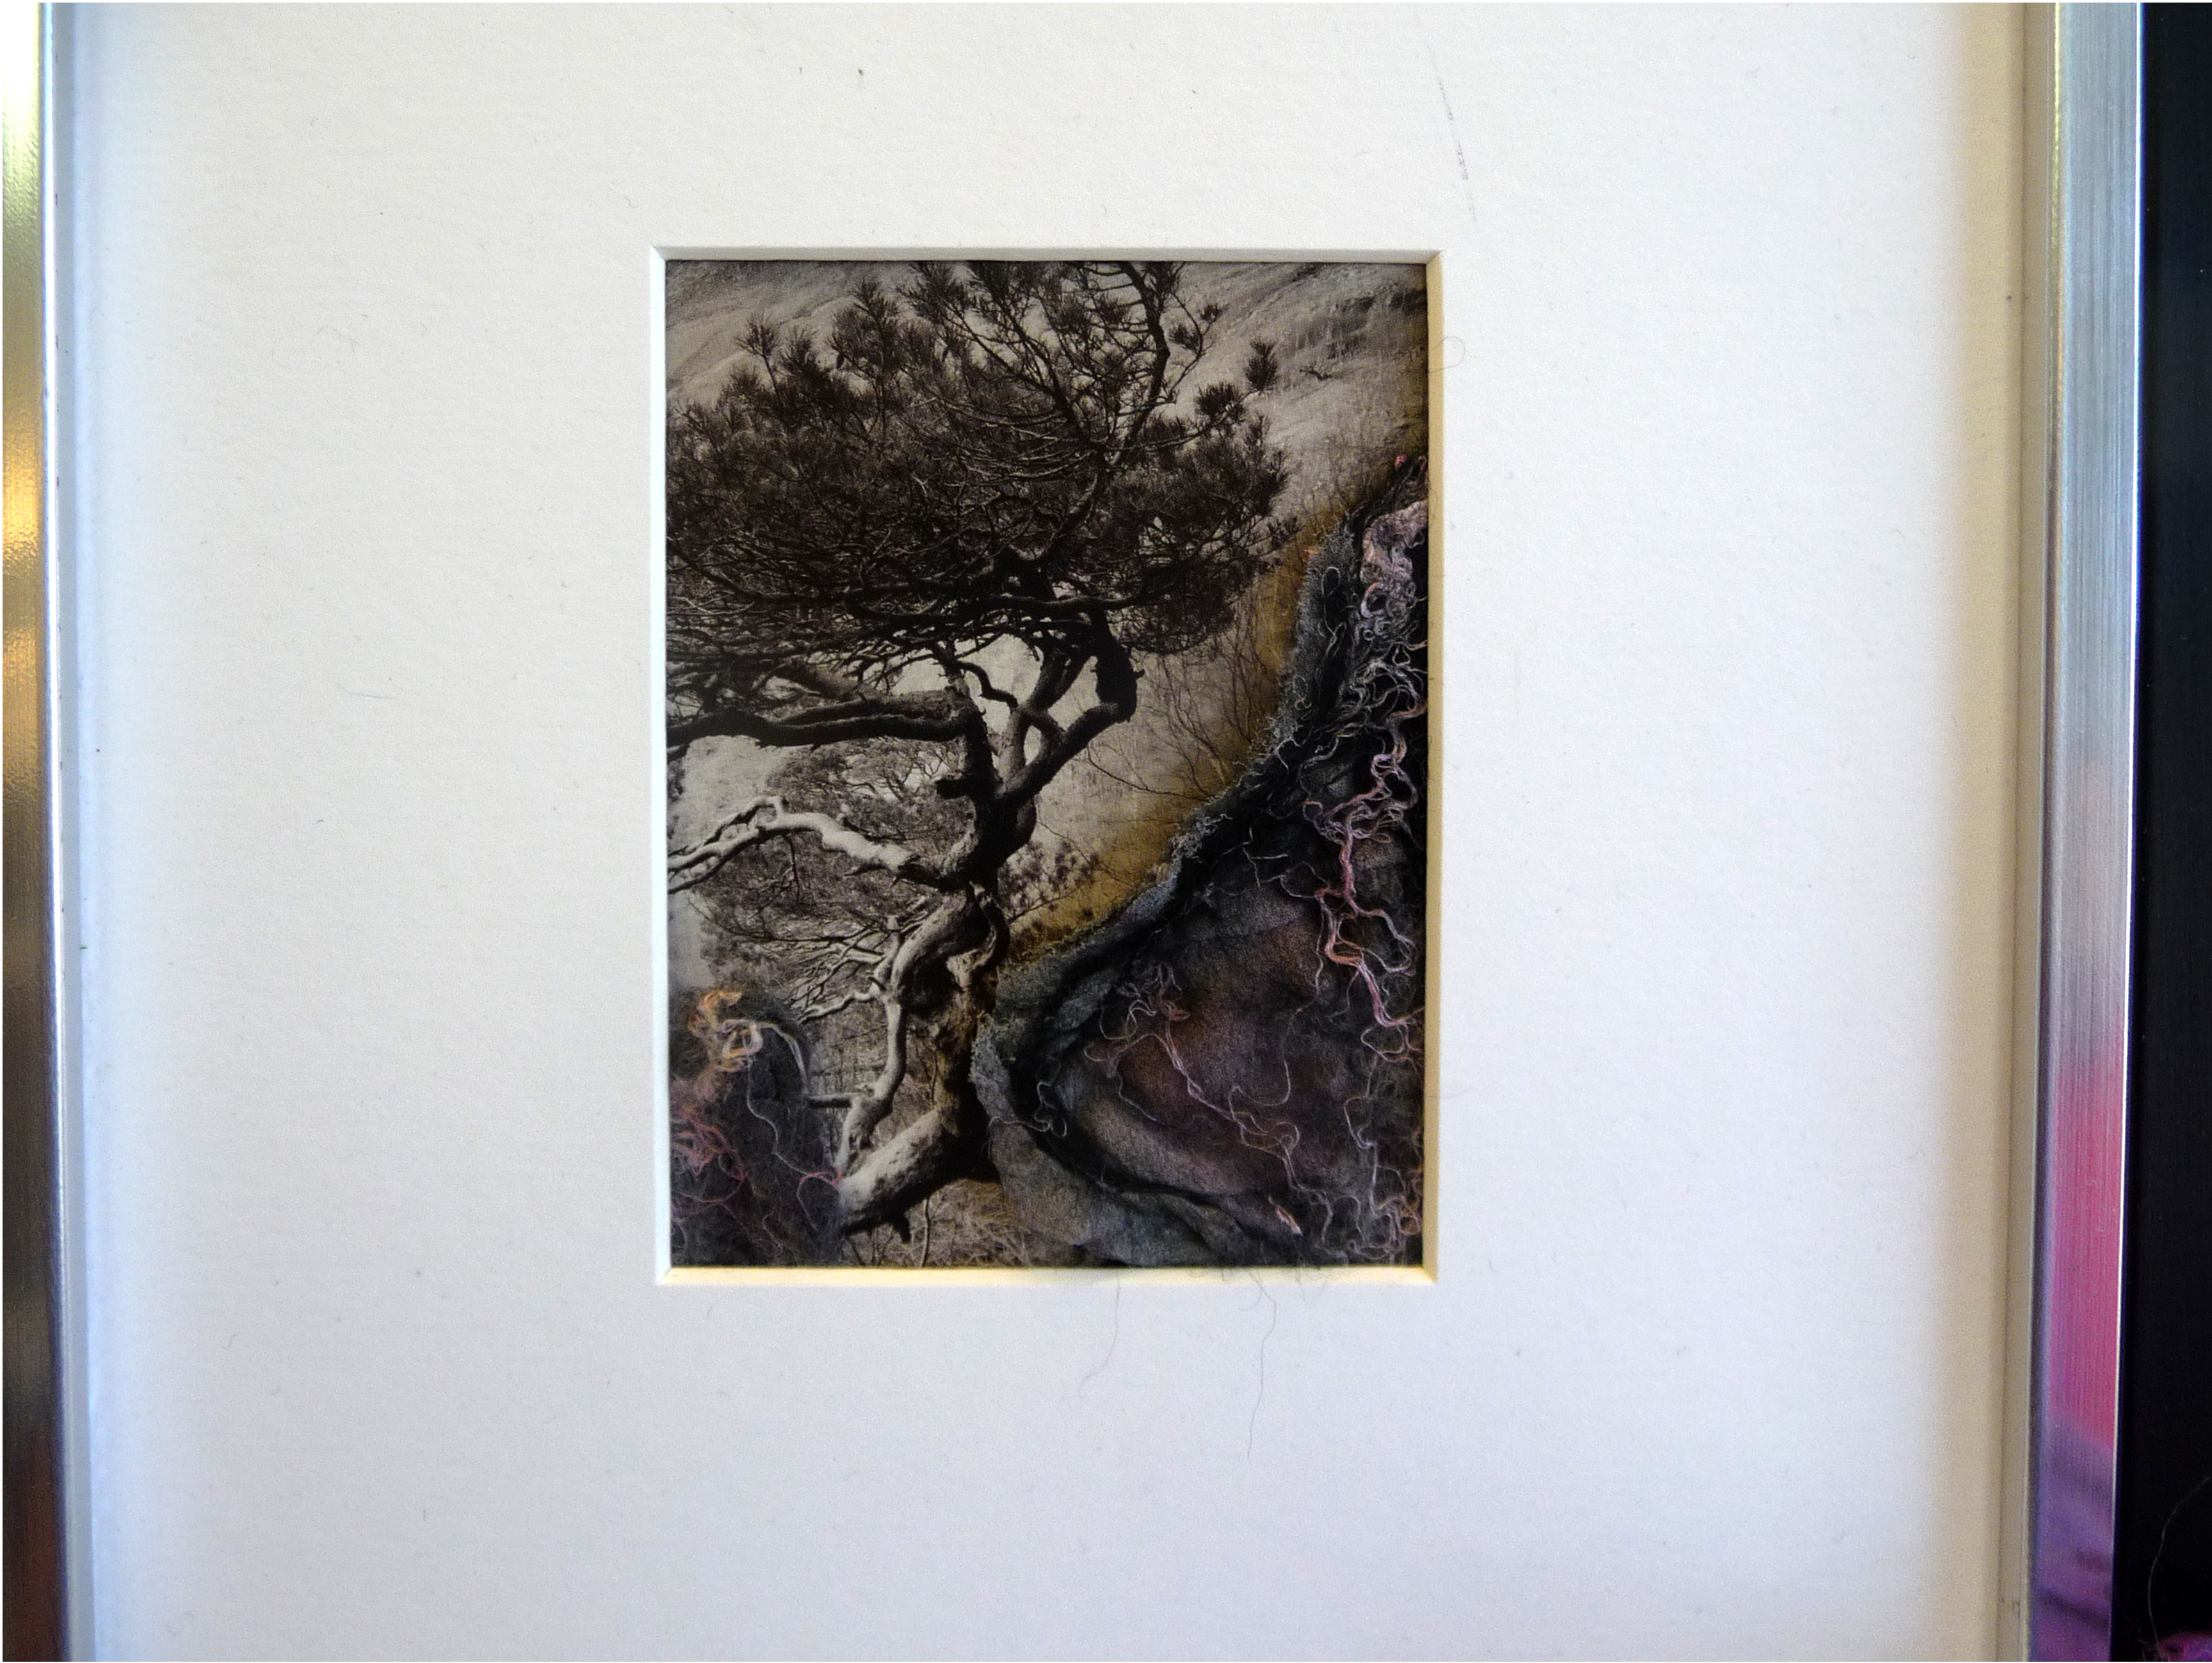 LONESOME TREE by Sue Tyndesley, nuno felted picture